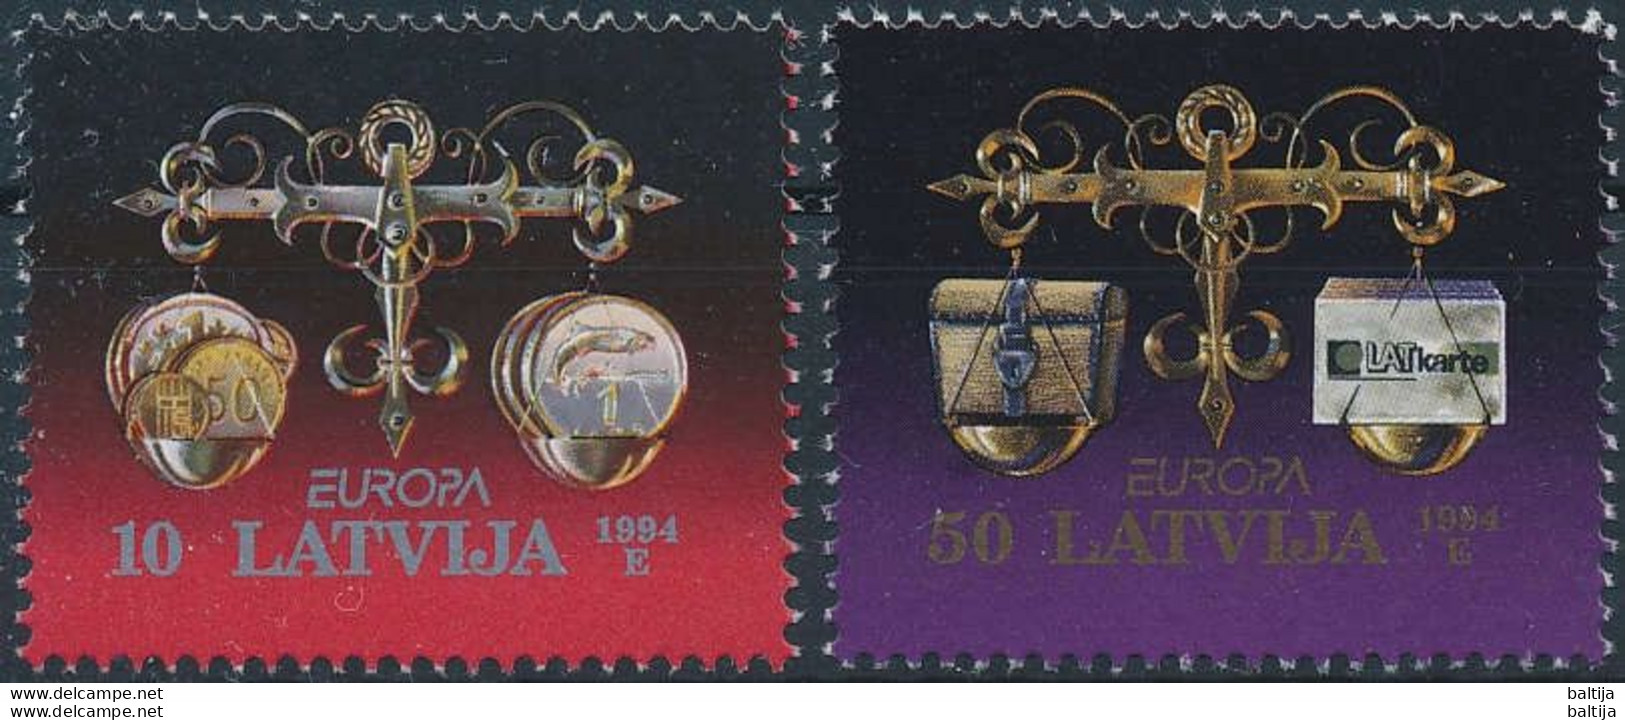 Mi 376-77 ** MNH / CEPT Europa, Discoveries And Innovations, Money, Coins - Letonia